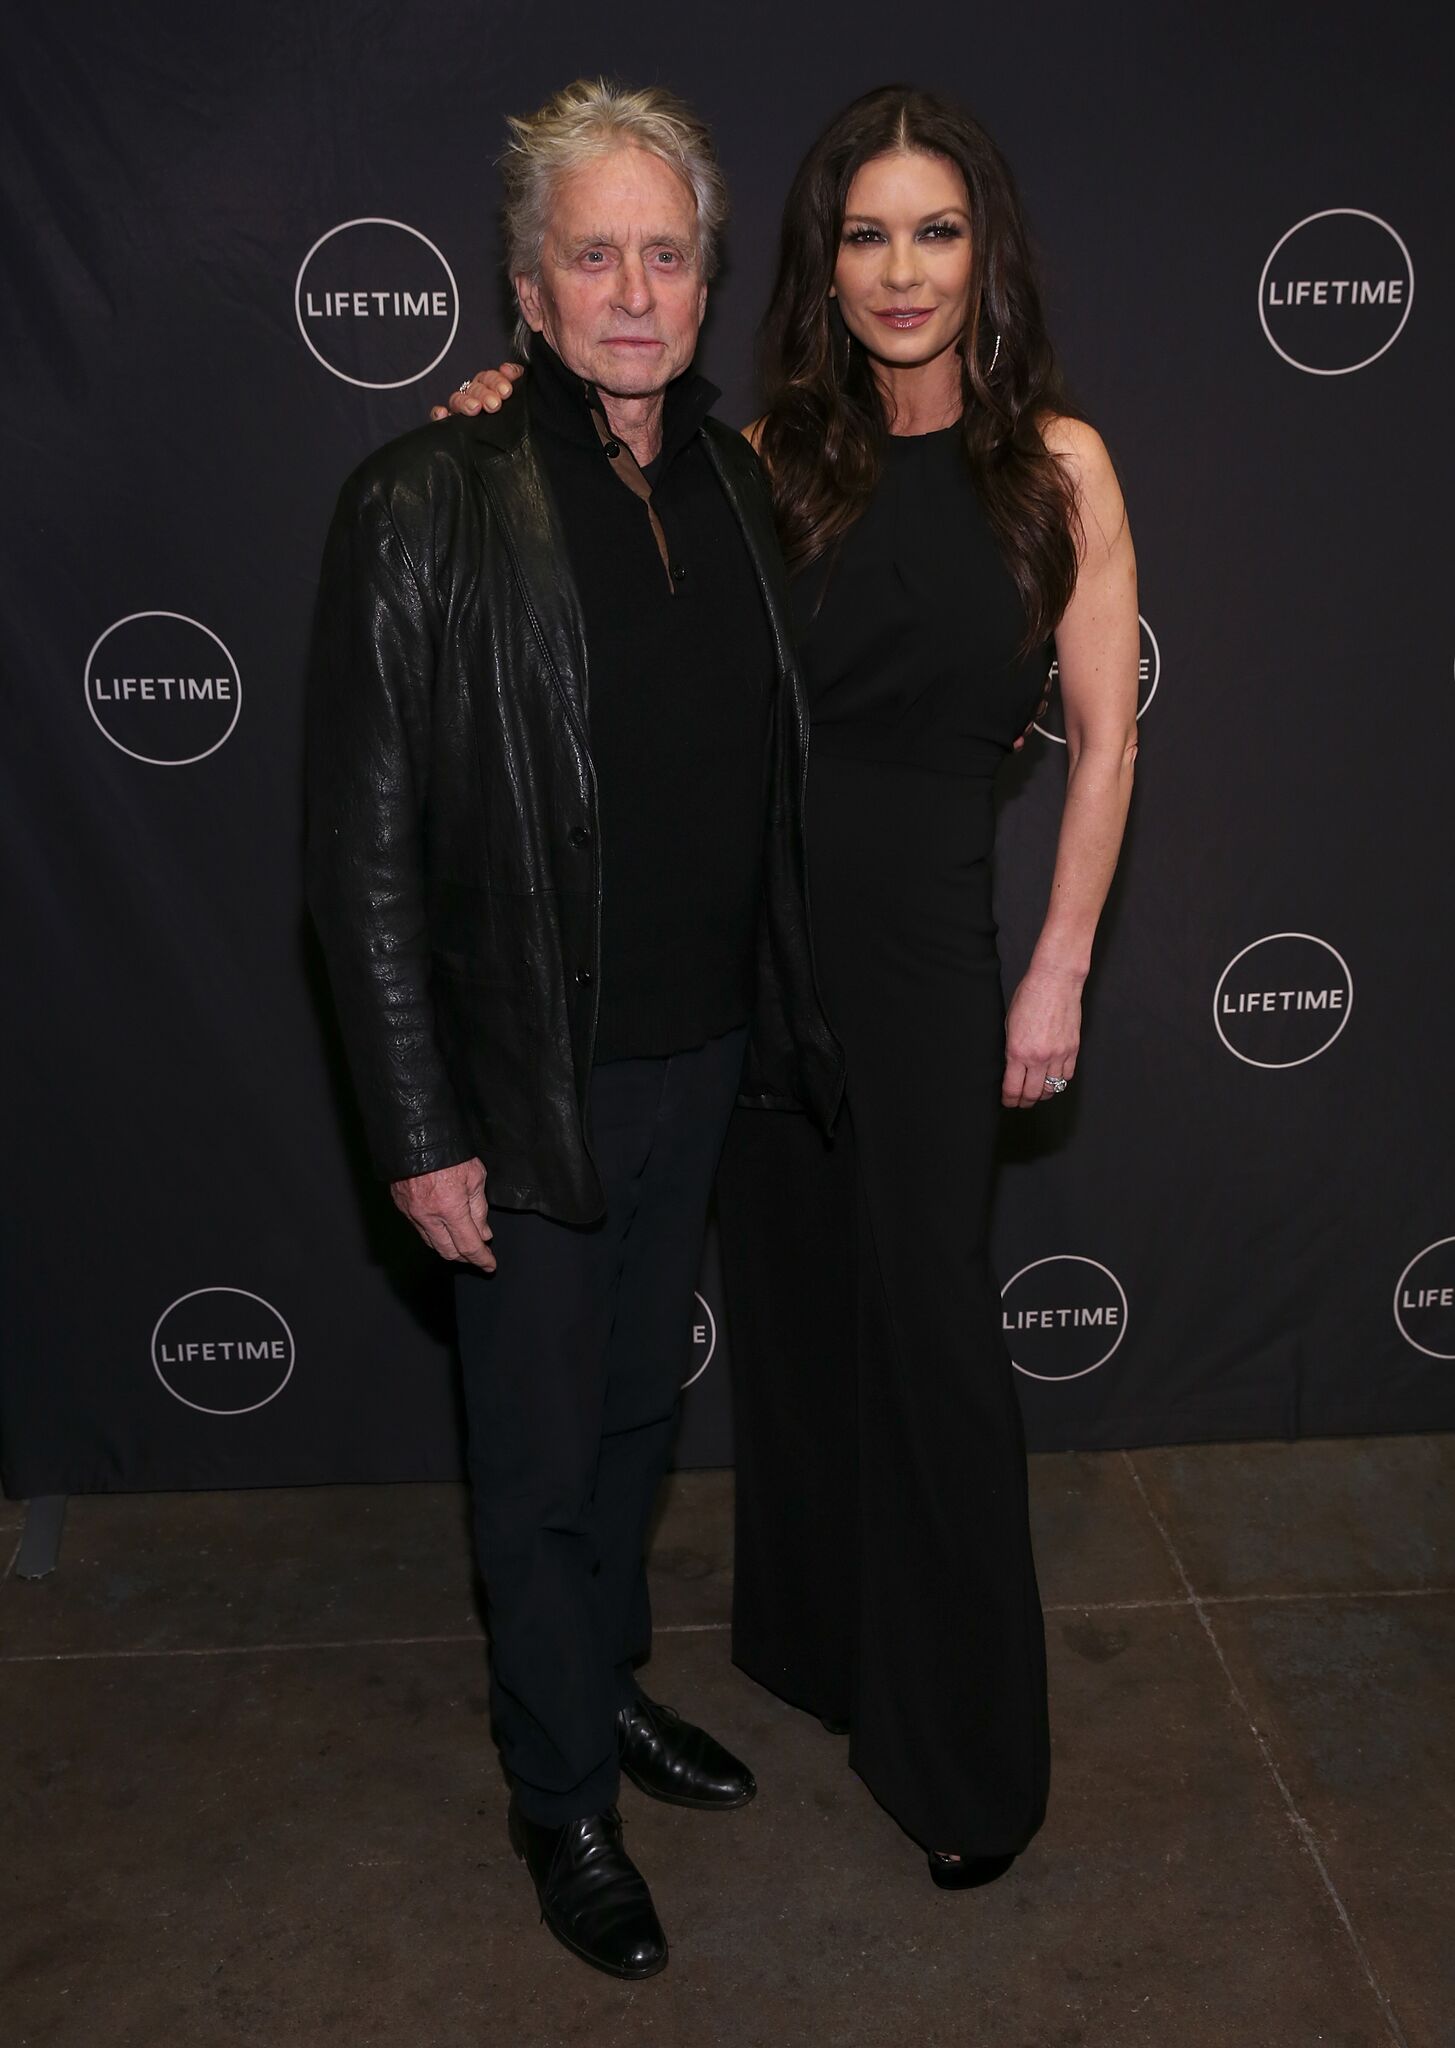 Michael Douglas and Catherine Zeta-Jones attend the Lifetime Luminaries screening of "Cocaine Godmother, The Griselda Blanco Story" at NeueHouse Madison Square | Getty Images